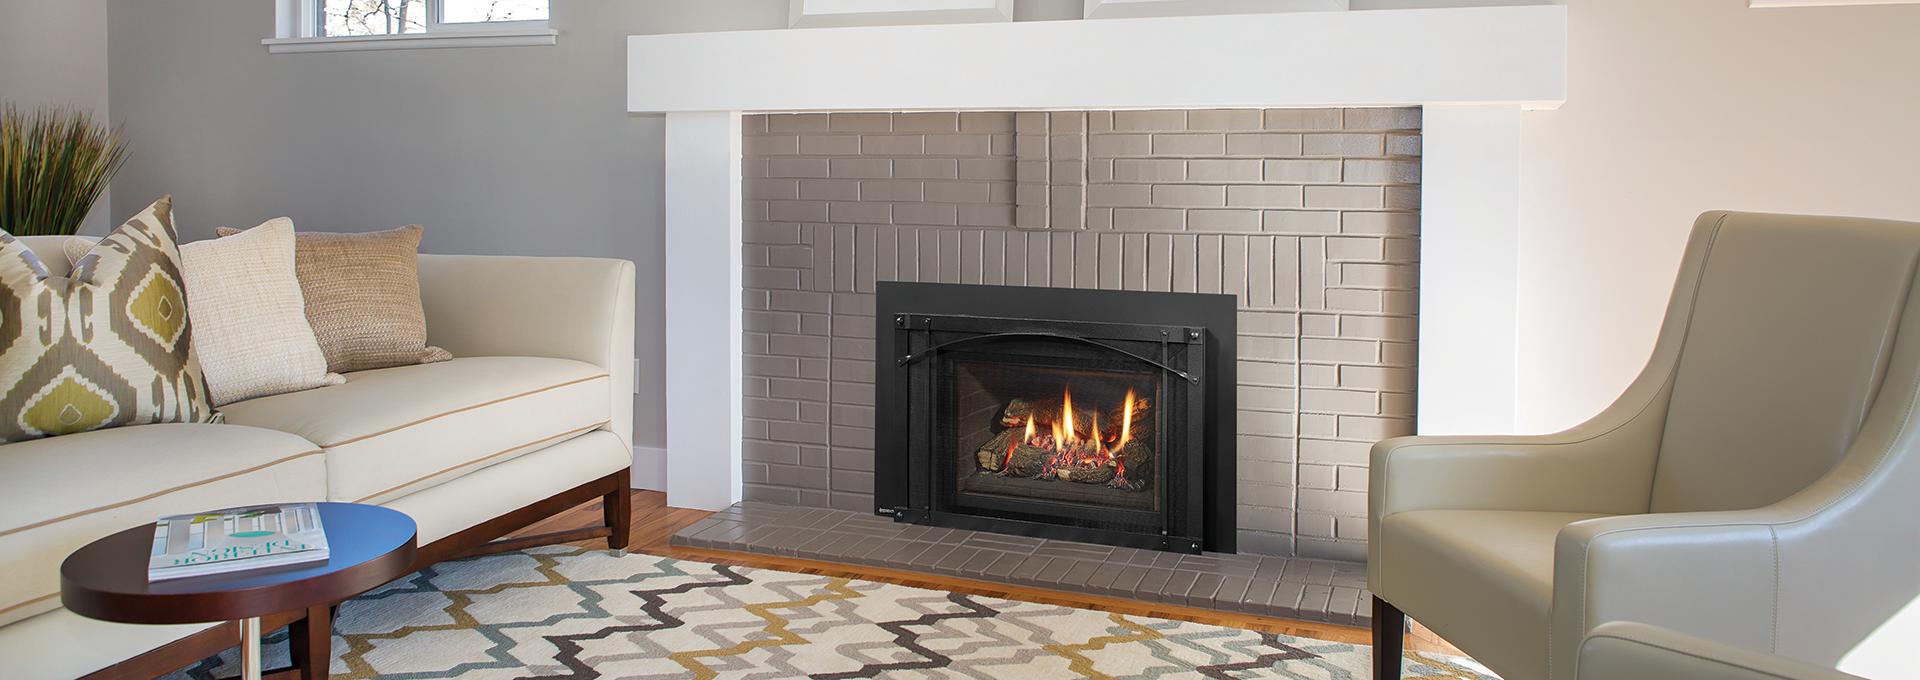 fireplace installed by Ener-G Tech, Inc.